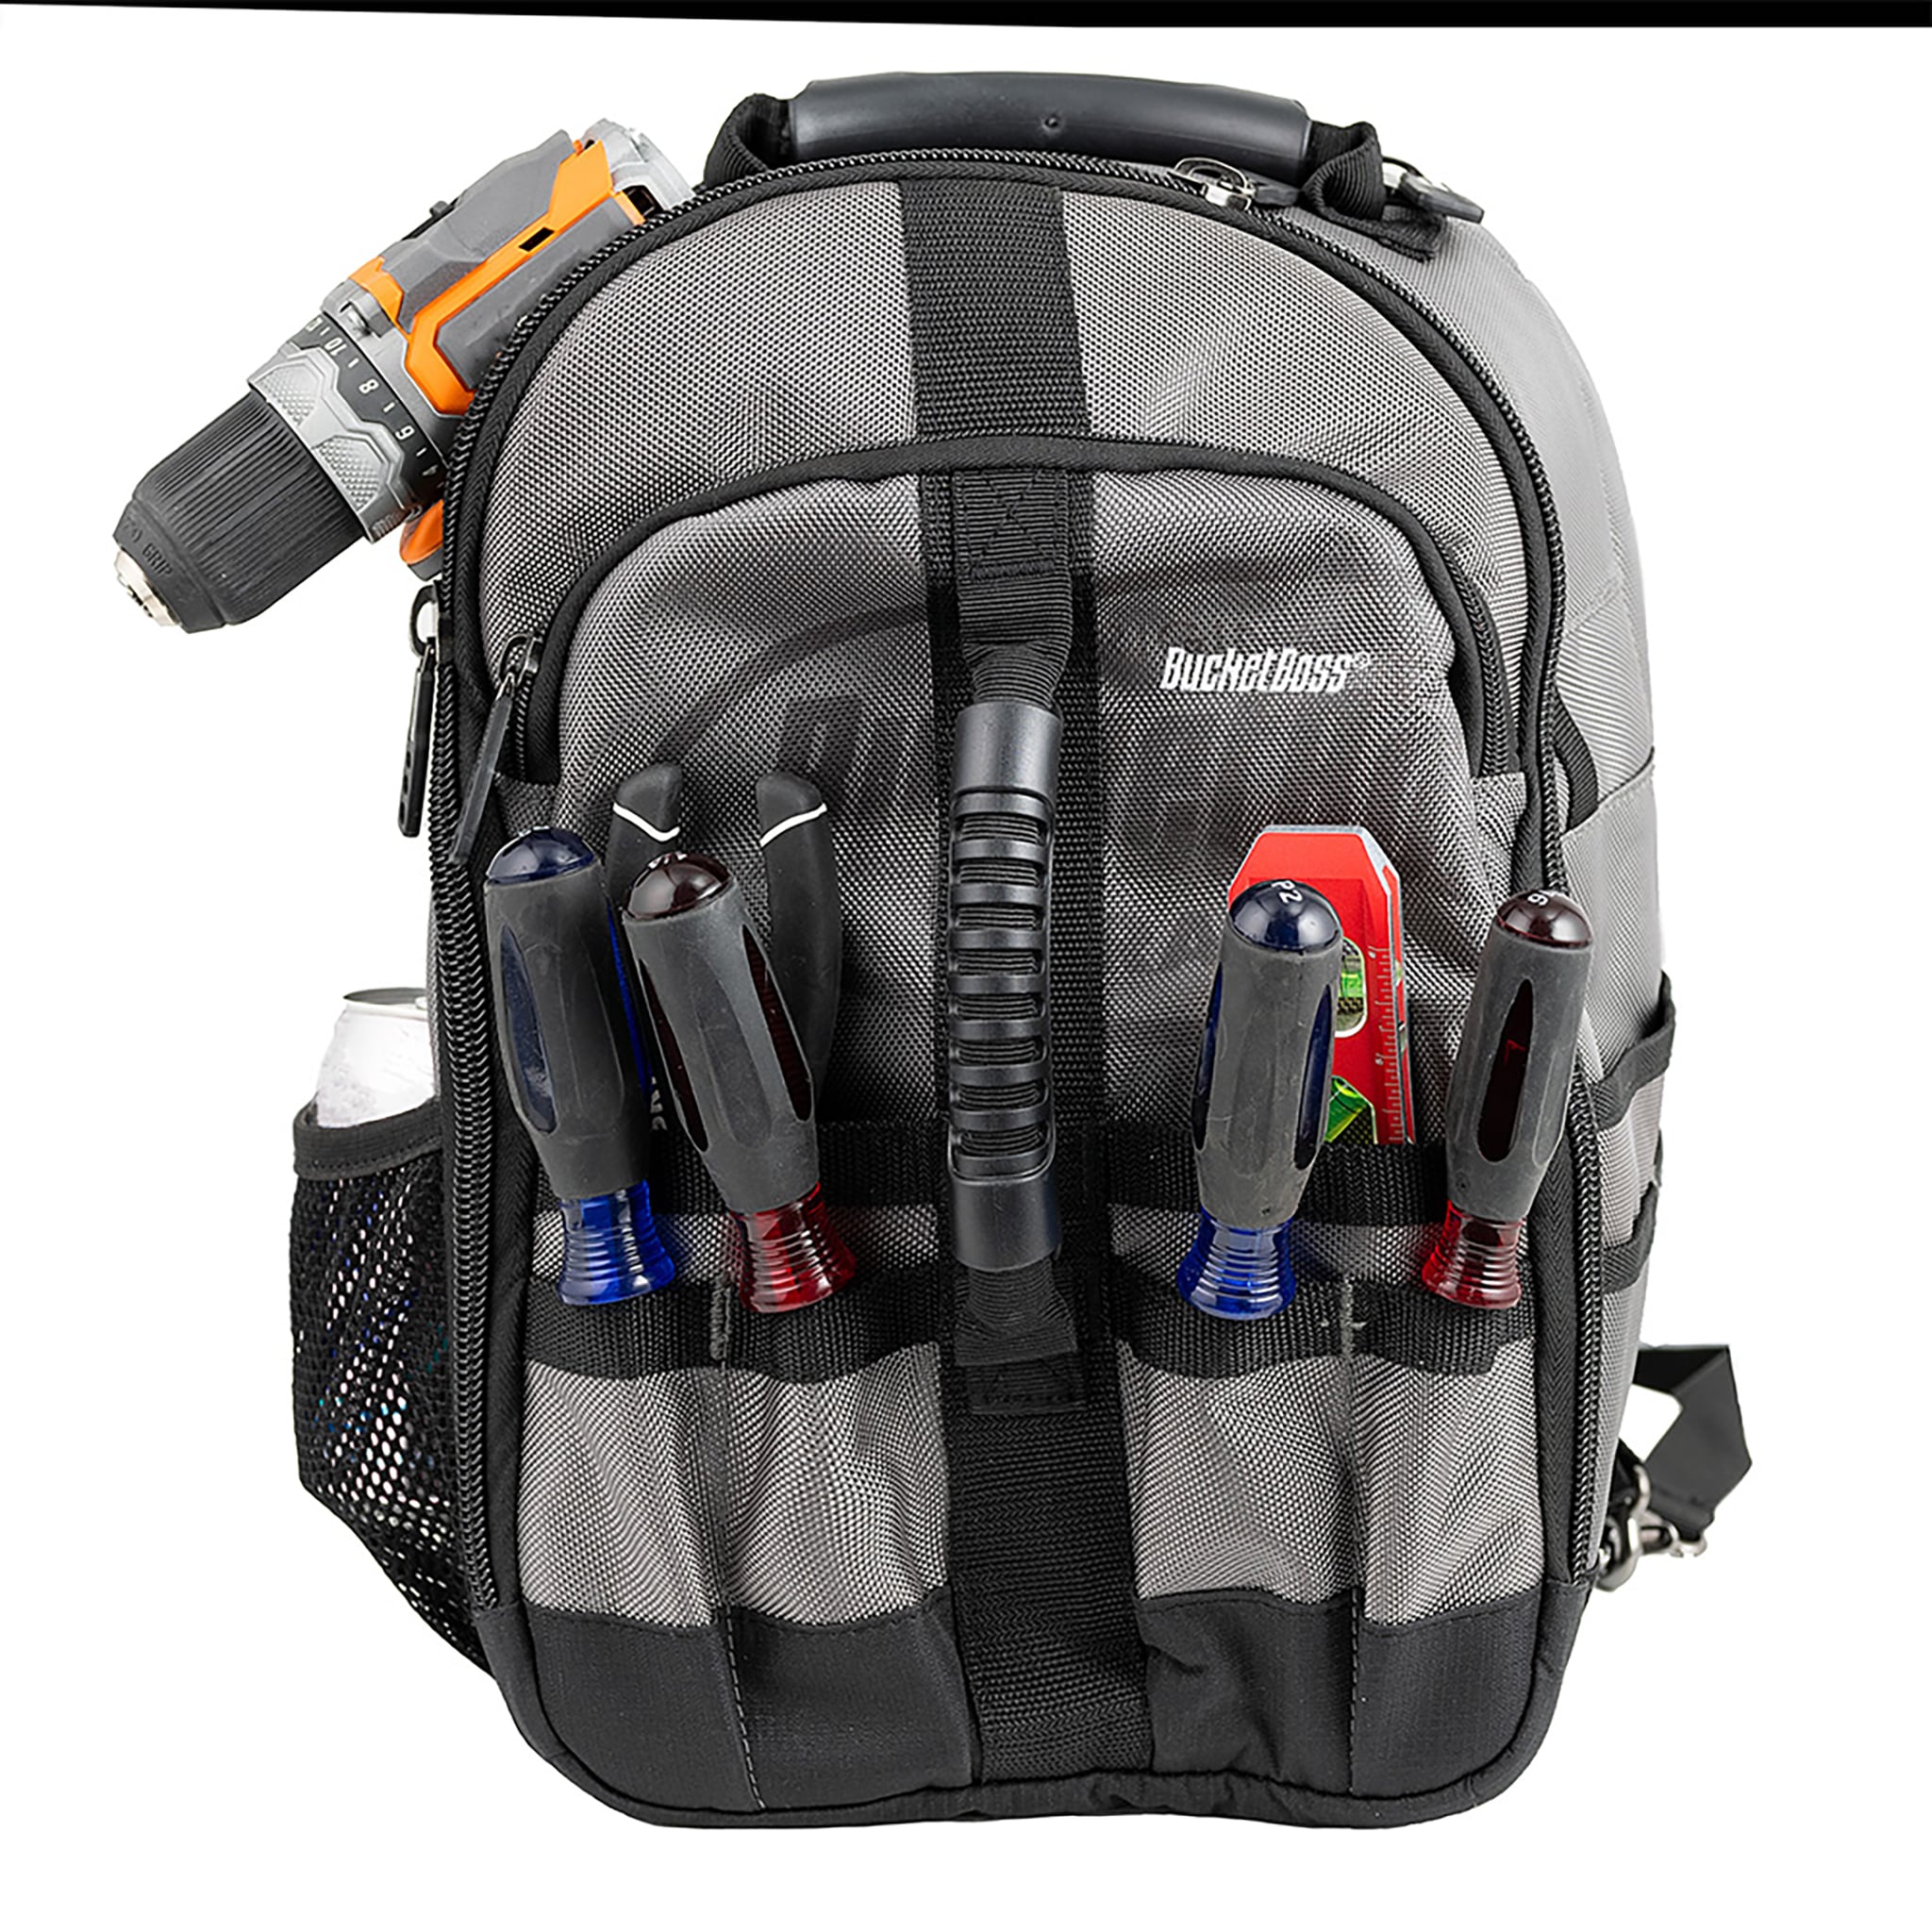 Bucket Boss SLING PACK Grey, Black Polyester 10.5-in Zippered Backpack in  the Tool Bags department at